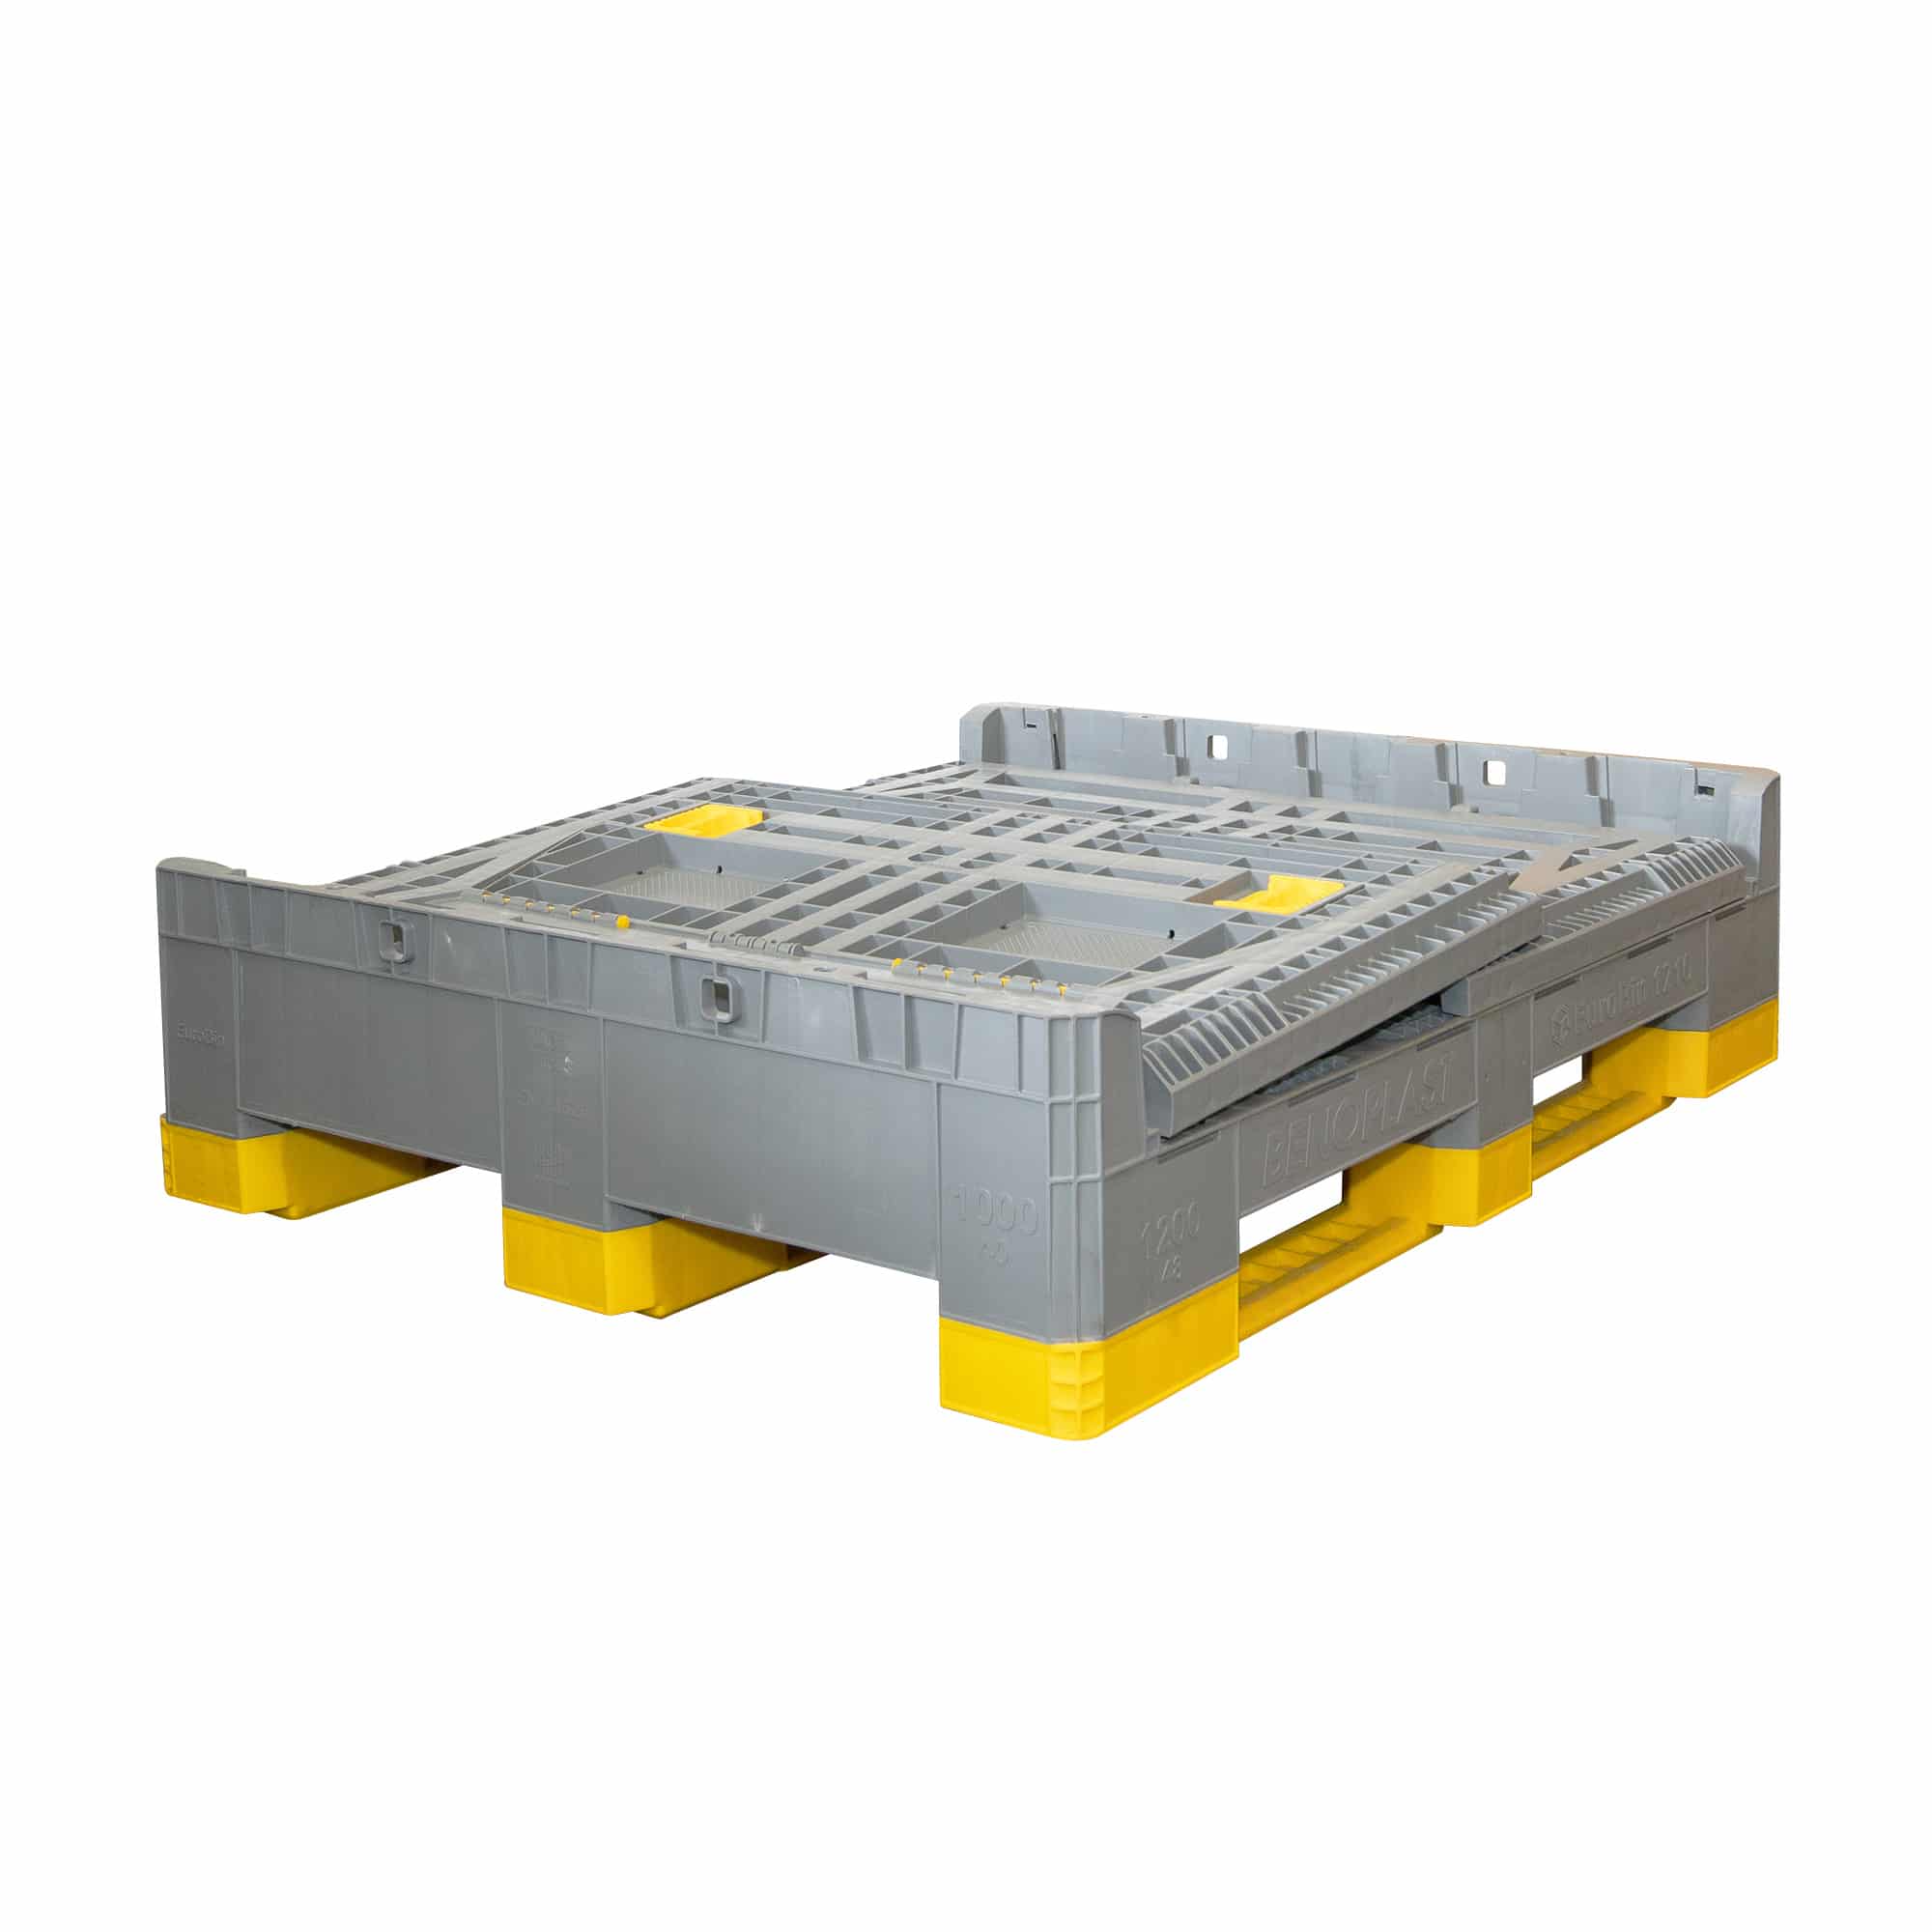 Palboxx Collapsible Pallet Box 1200mm x 1000mm x 860mm - 3 Runners